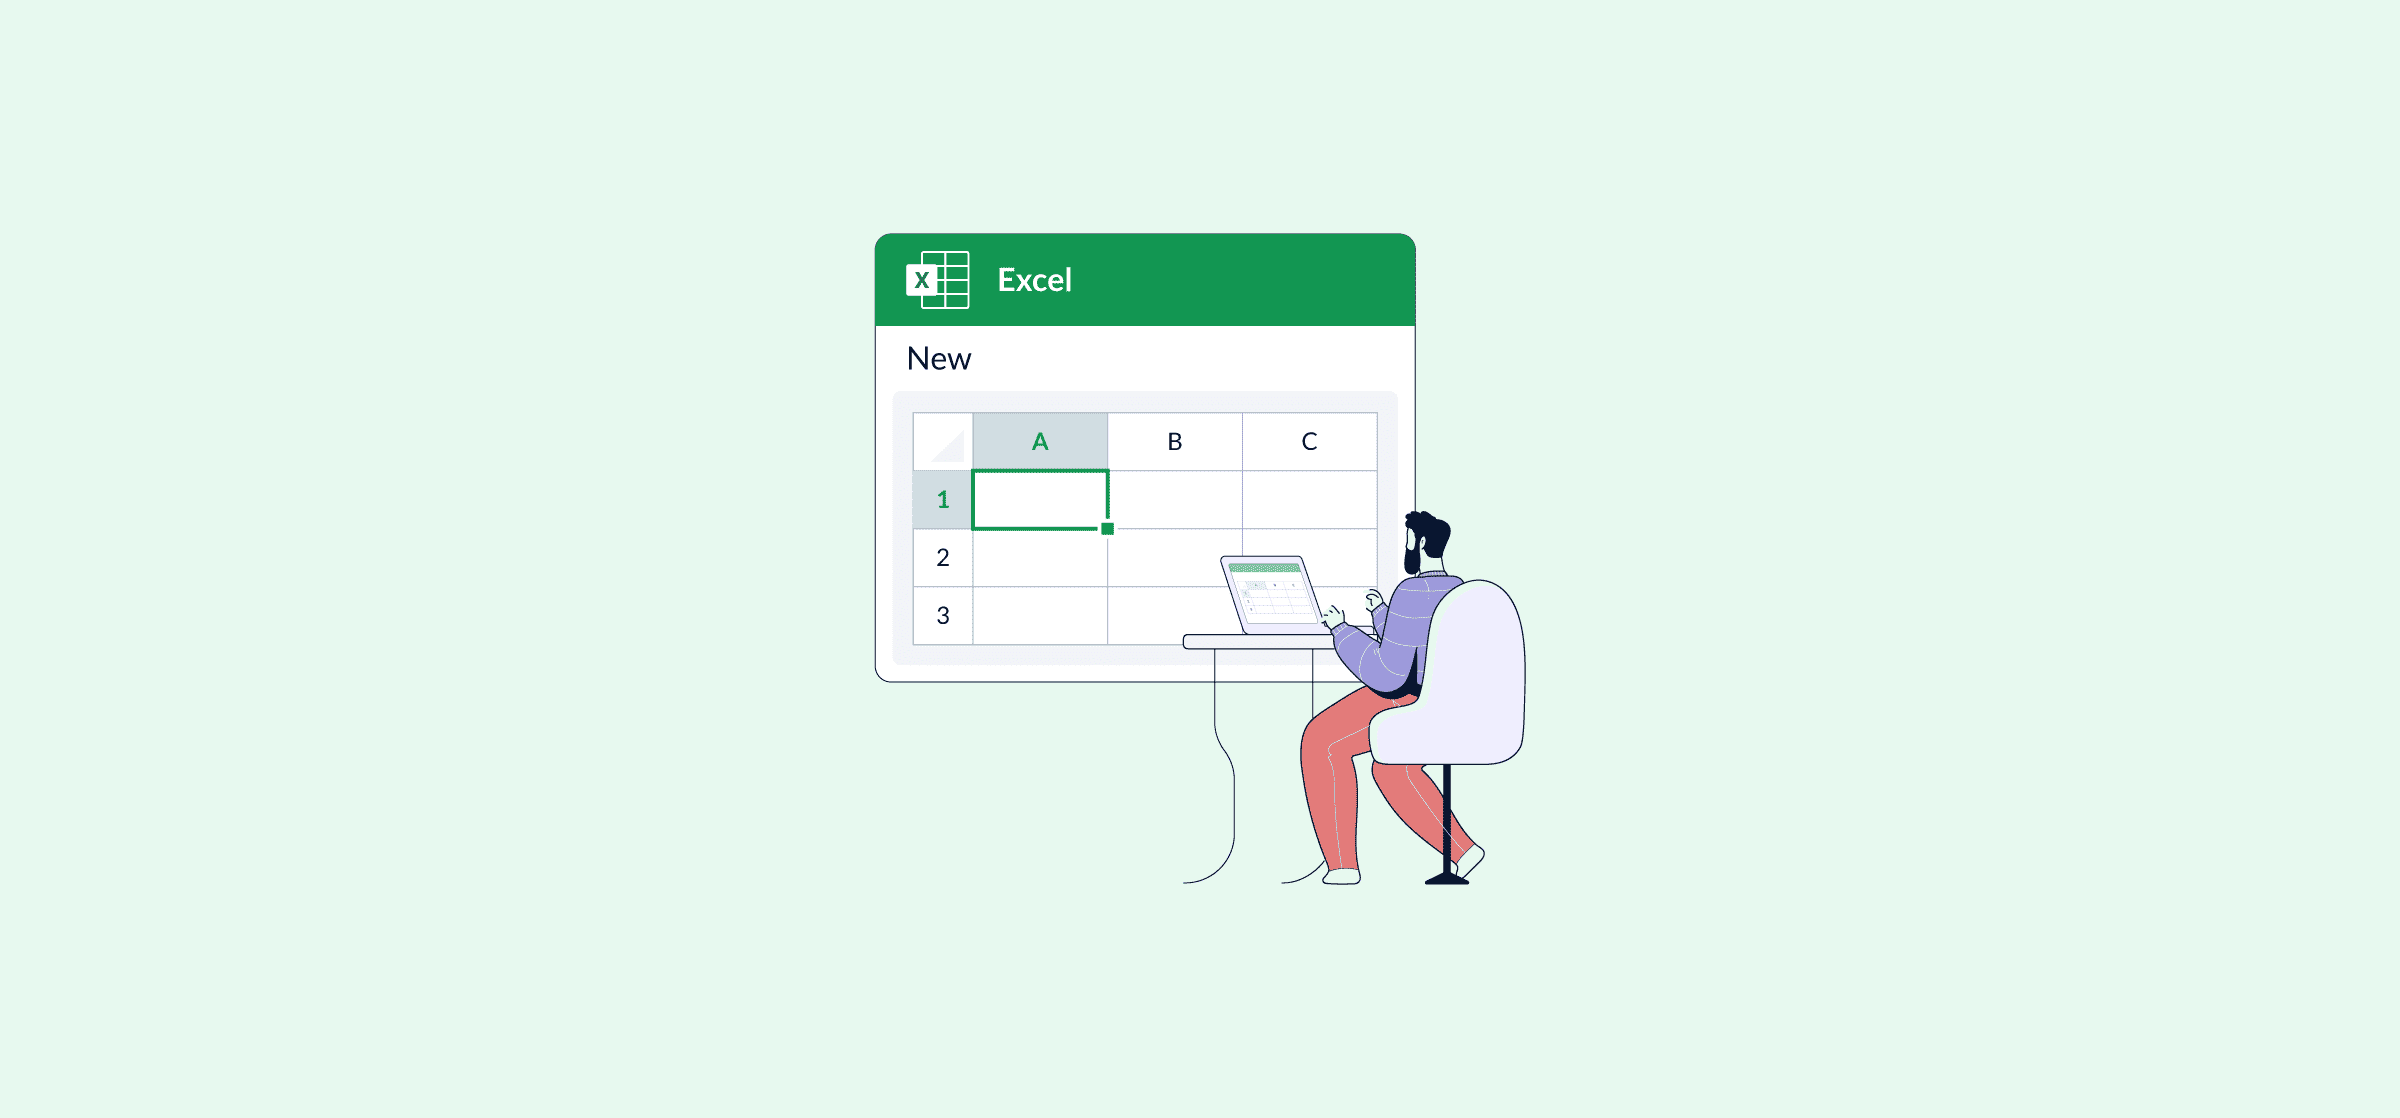 An illustration of s person sitting at a computer working on a spreadsheet, representing how to use Excel.